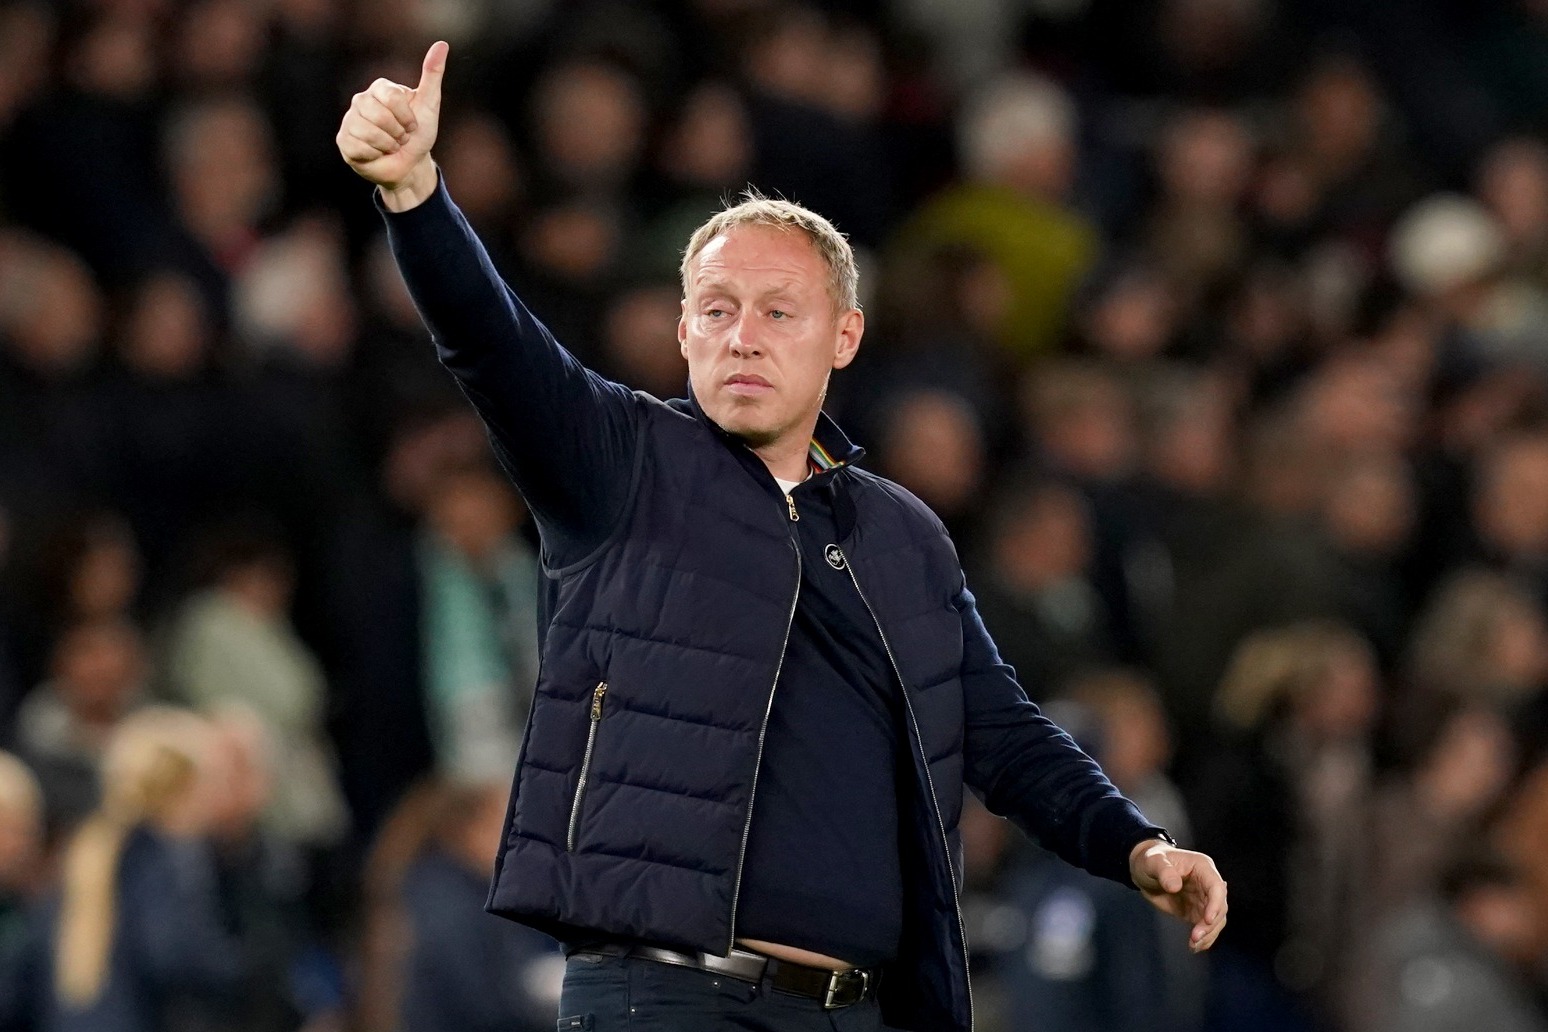 Steve Cooper admits job makes emotions hard to control as FA charge is processed 